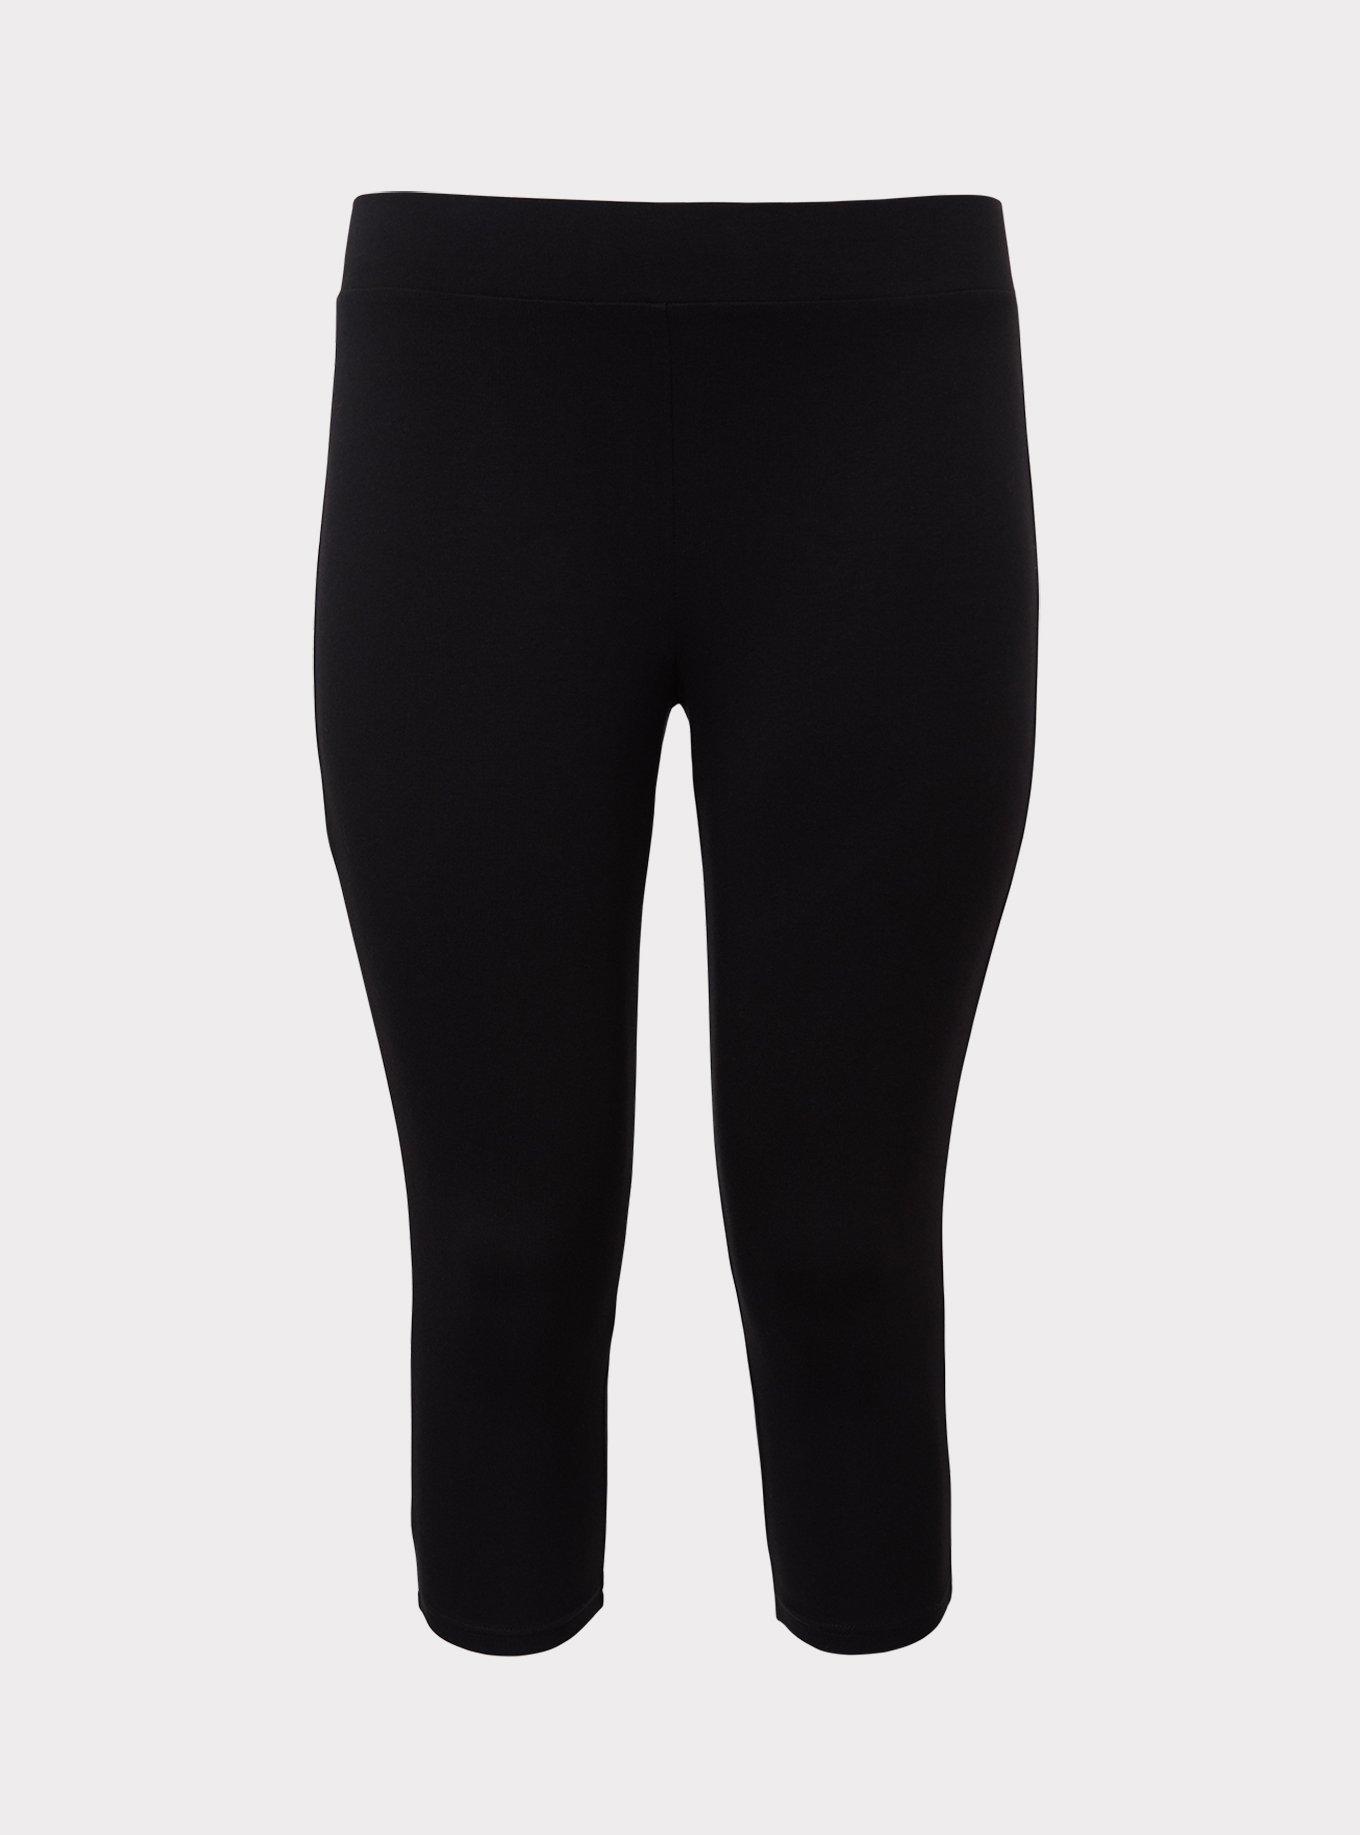 Black plus size high waisted compression capri leggings. Inseam  approximately 17 in length. - Skinny leg design - Does not ball or pill -  Comfortable and easy pull-on style - Solid color 